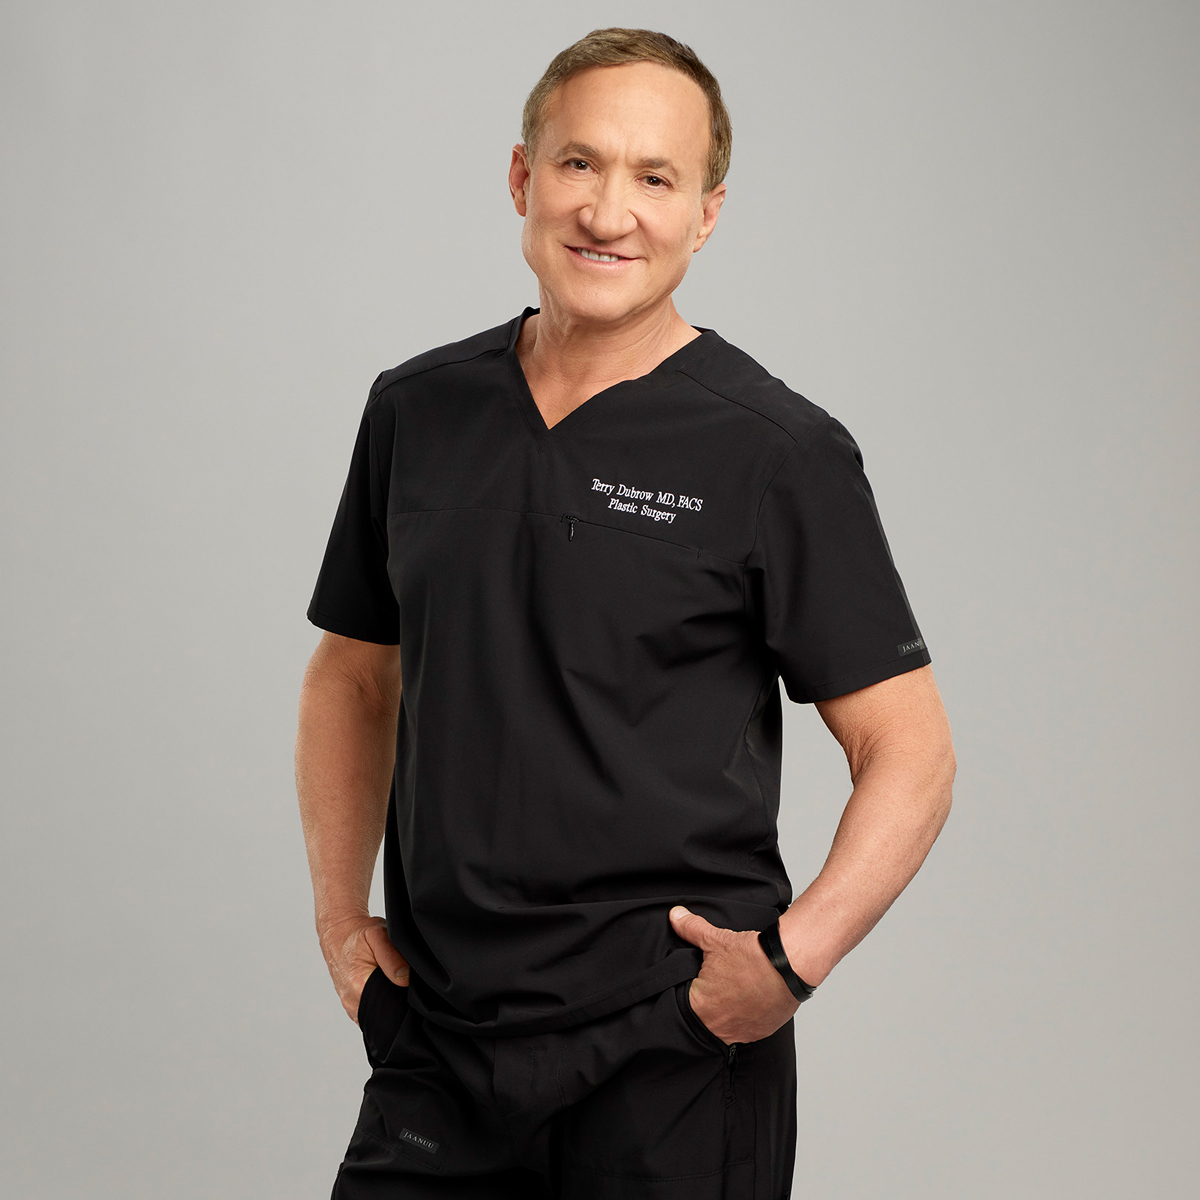 Dr. Terry Dubrow Shares Health Update After Quitting Ozempic